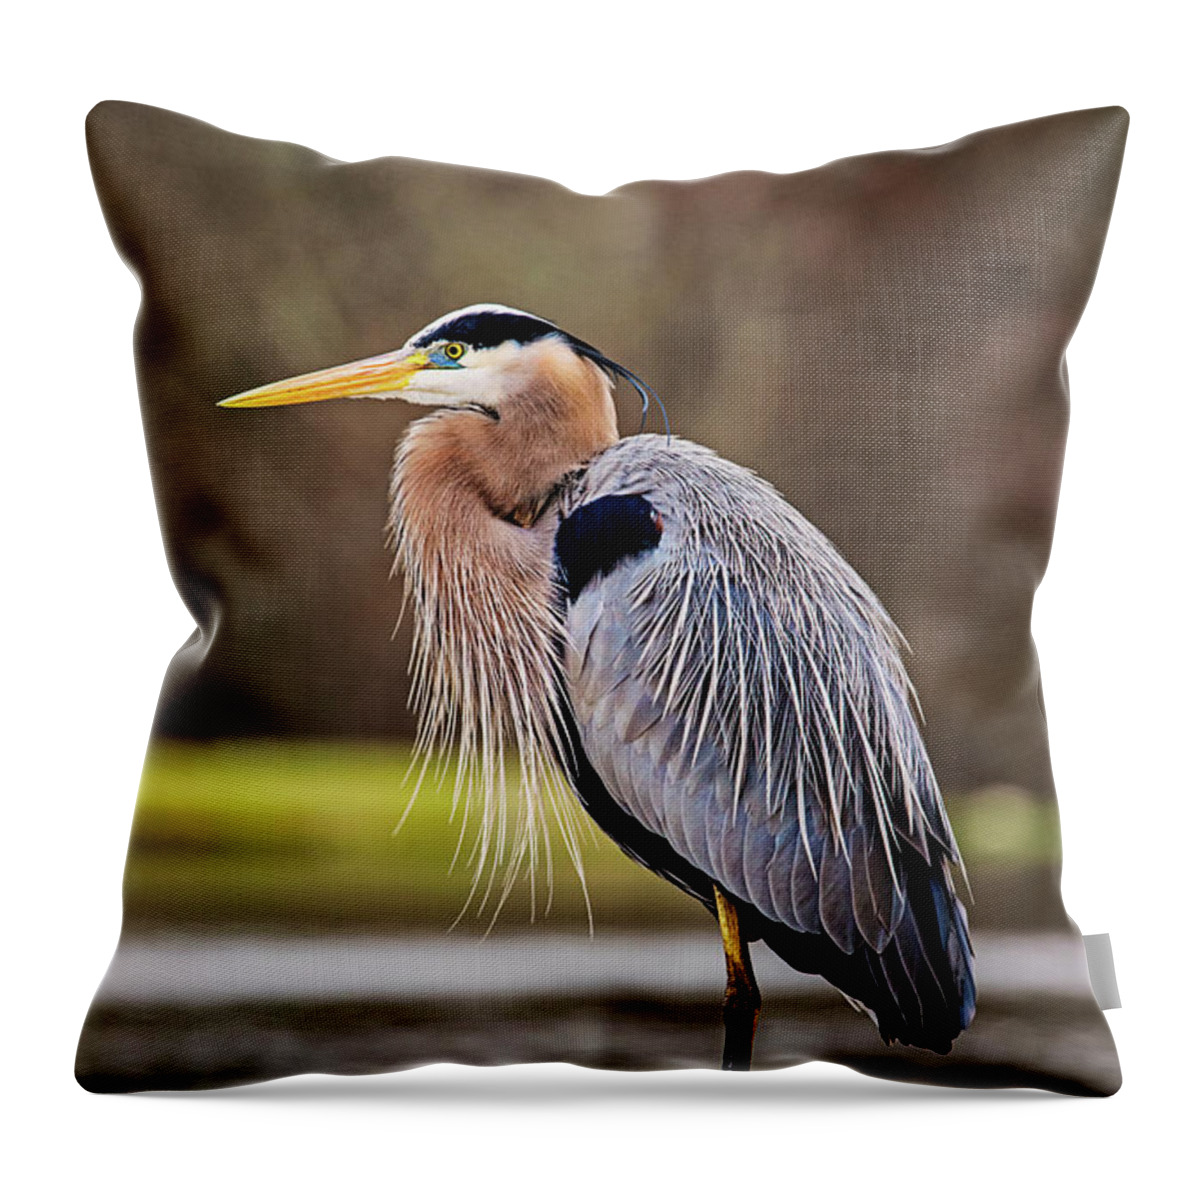  Throw Pillow featuring the photograph The Fisherman by Scott Pellegrin